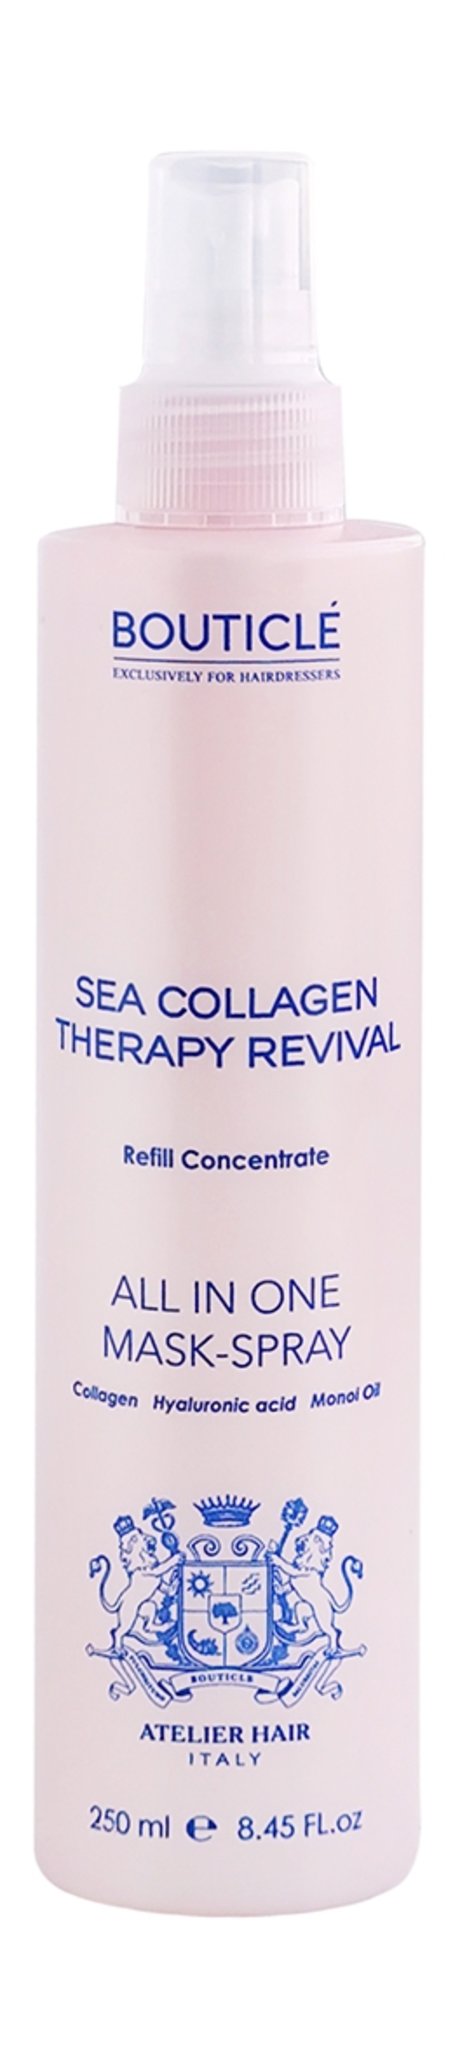 bouticle sea collagen therapy revival all in one mask-spray